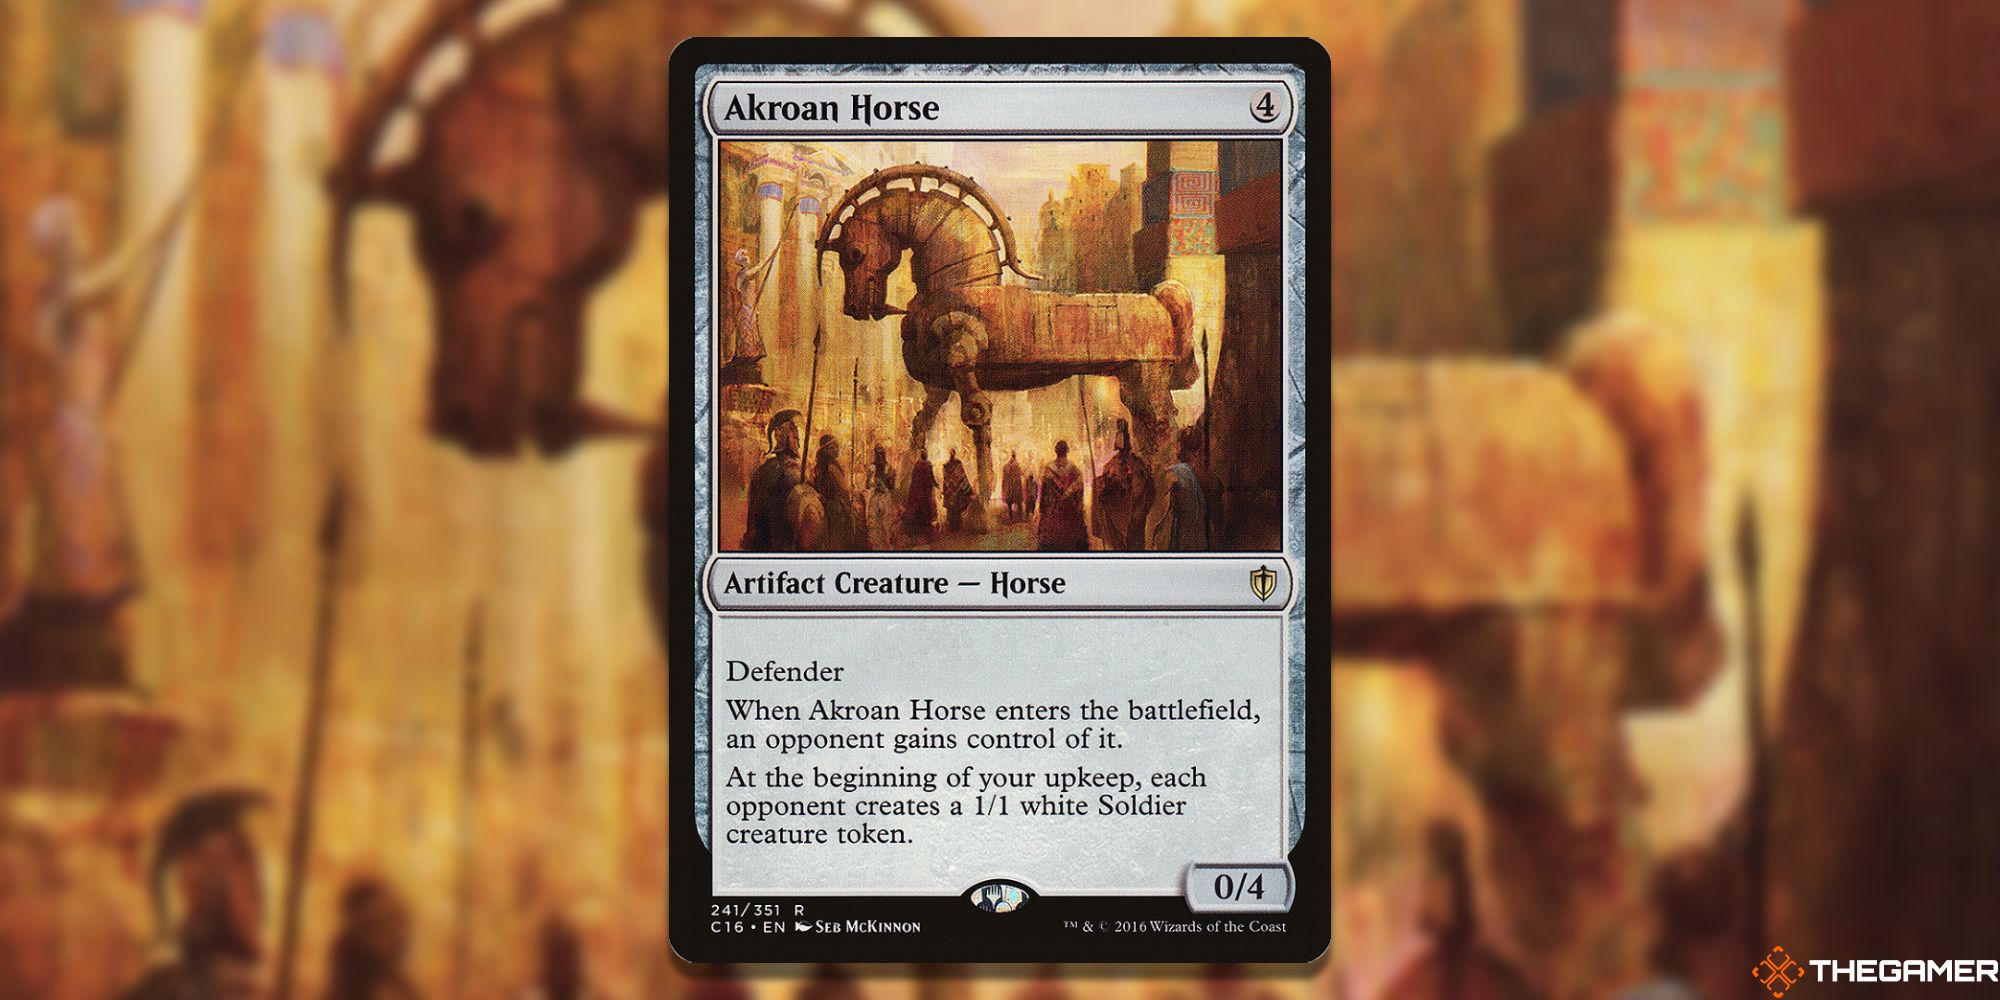 An image of the Akroan Horse card in Magic: The Gathering, with artwork by Seb McKinnon